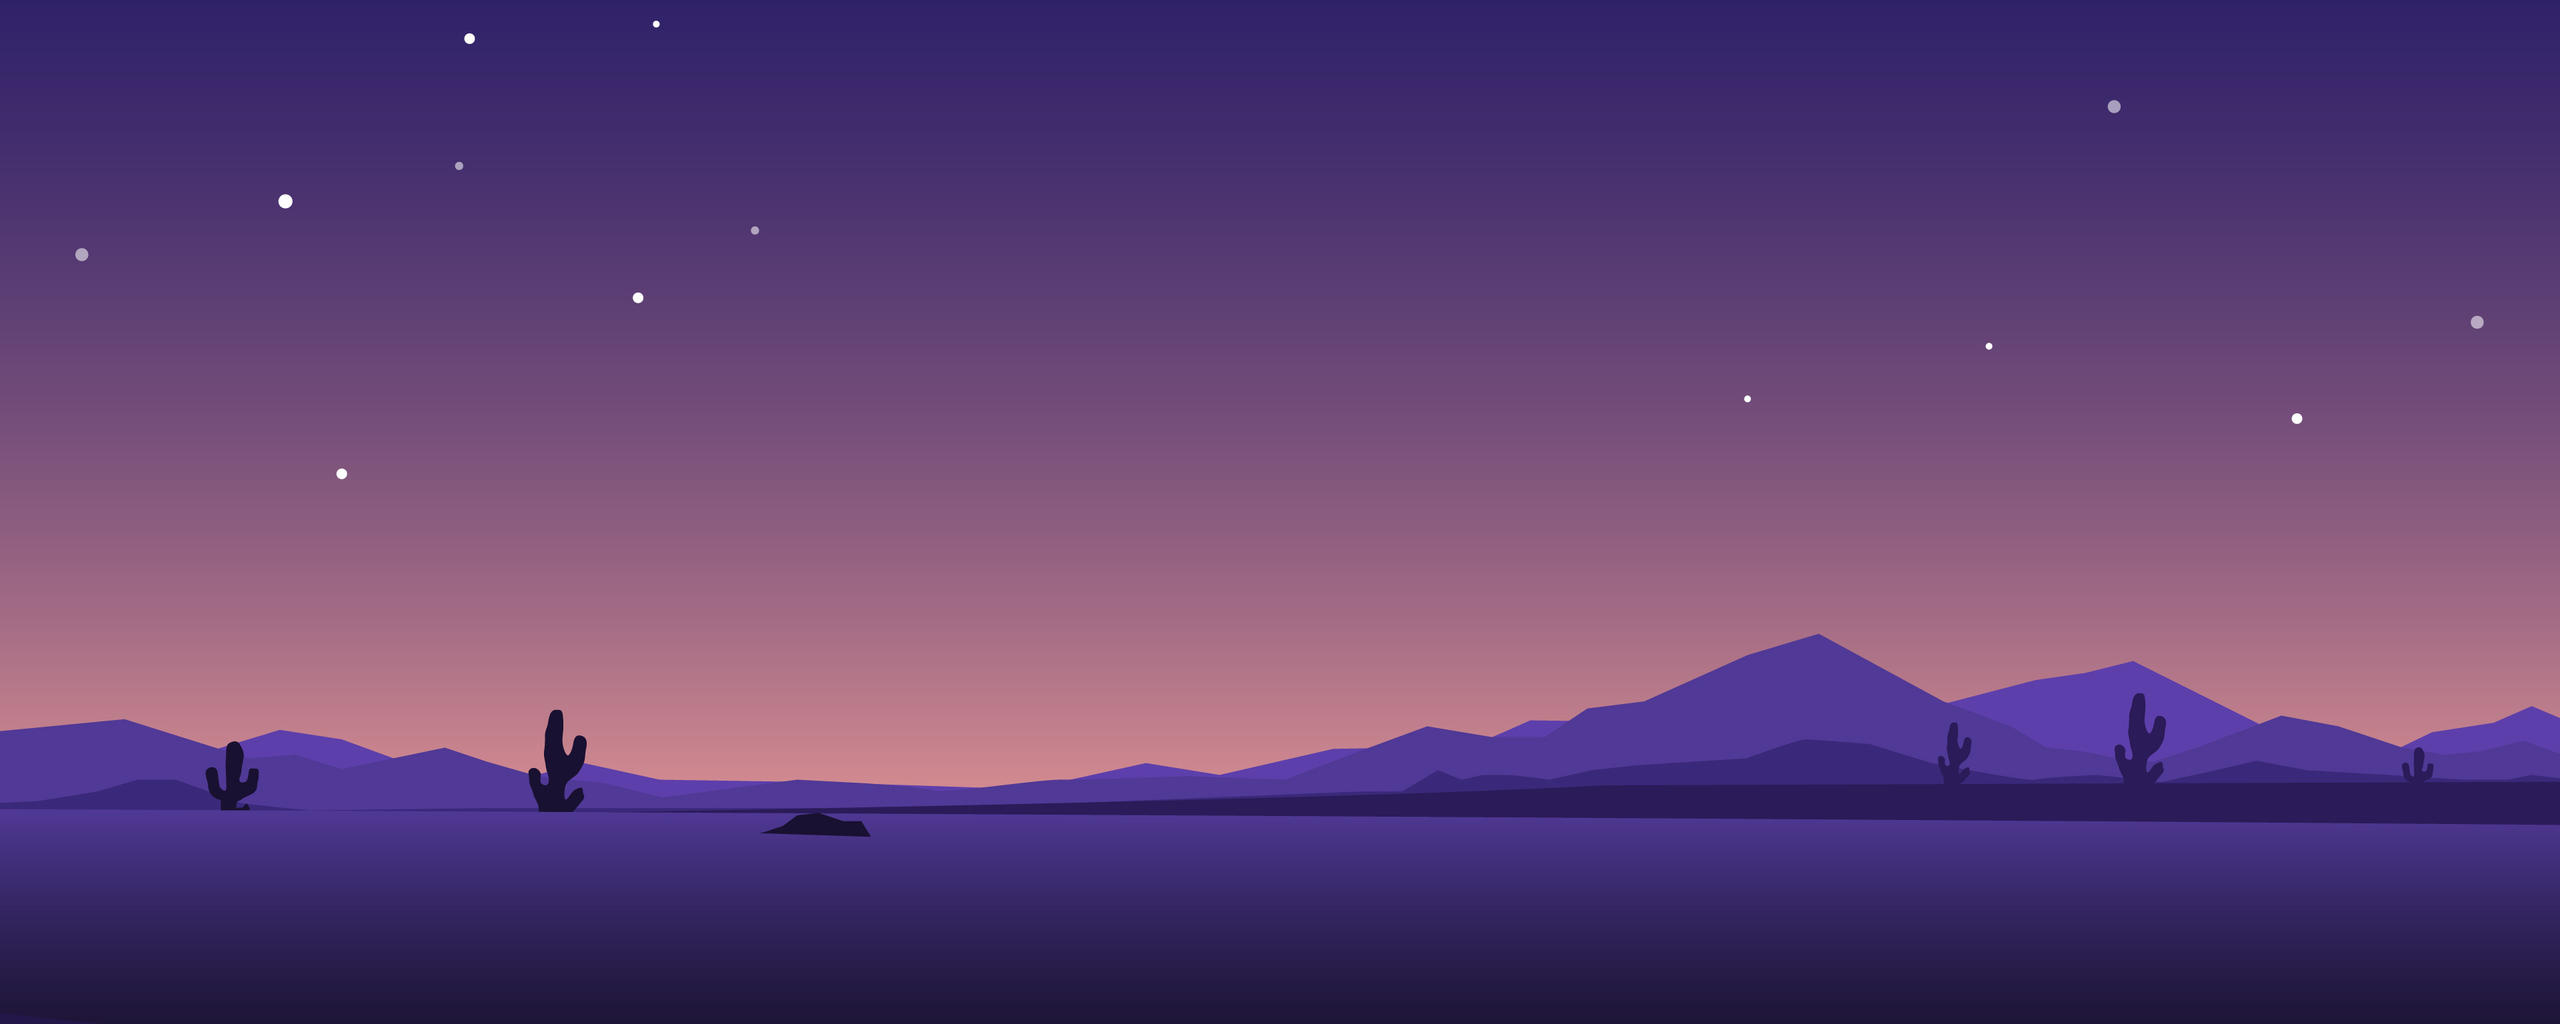 A purple sky with mountains and stars - Desert